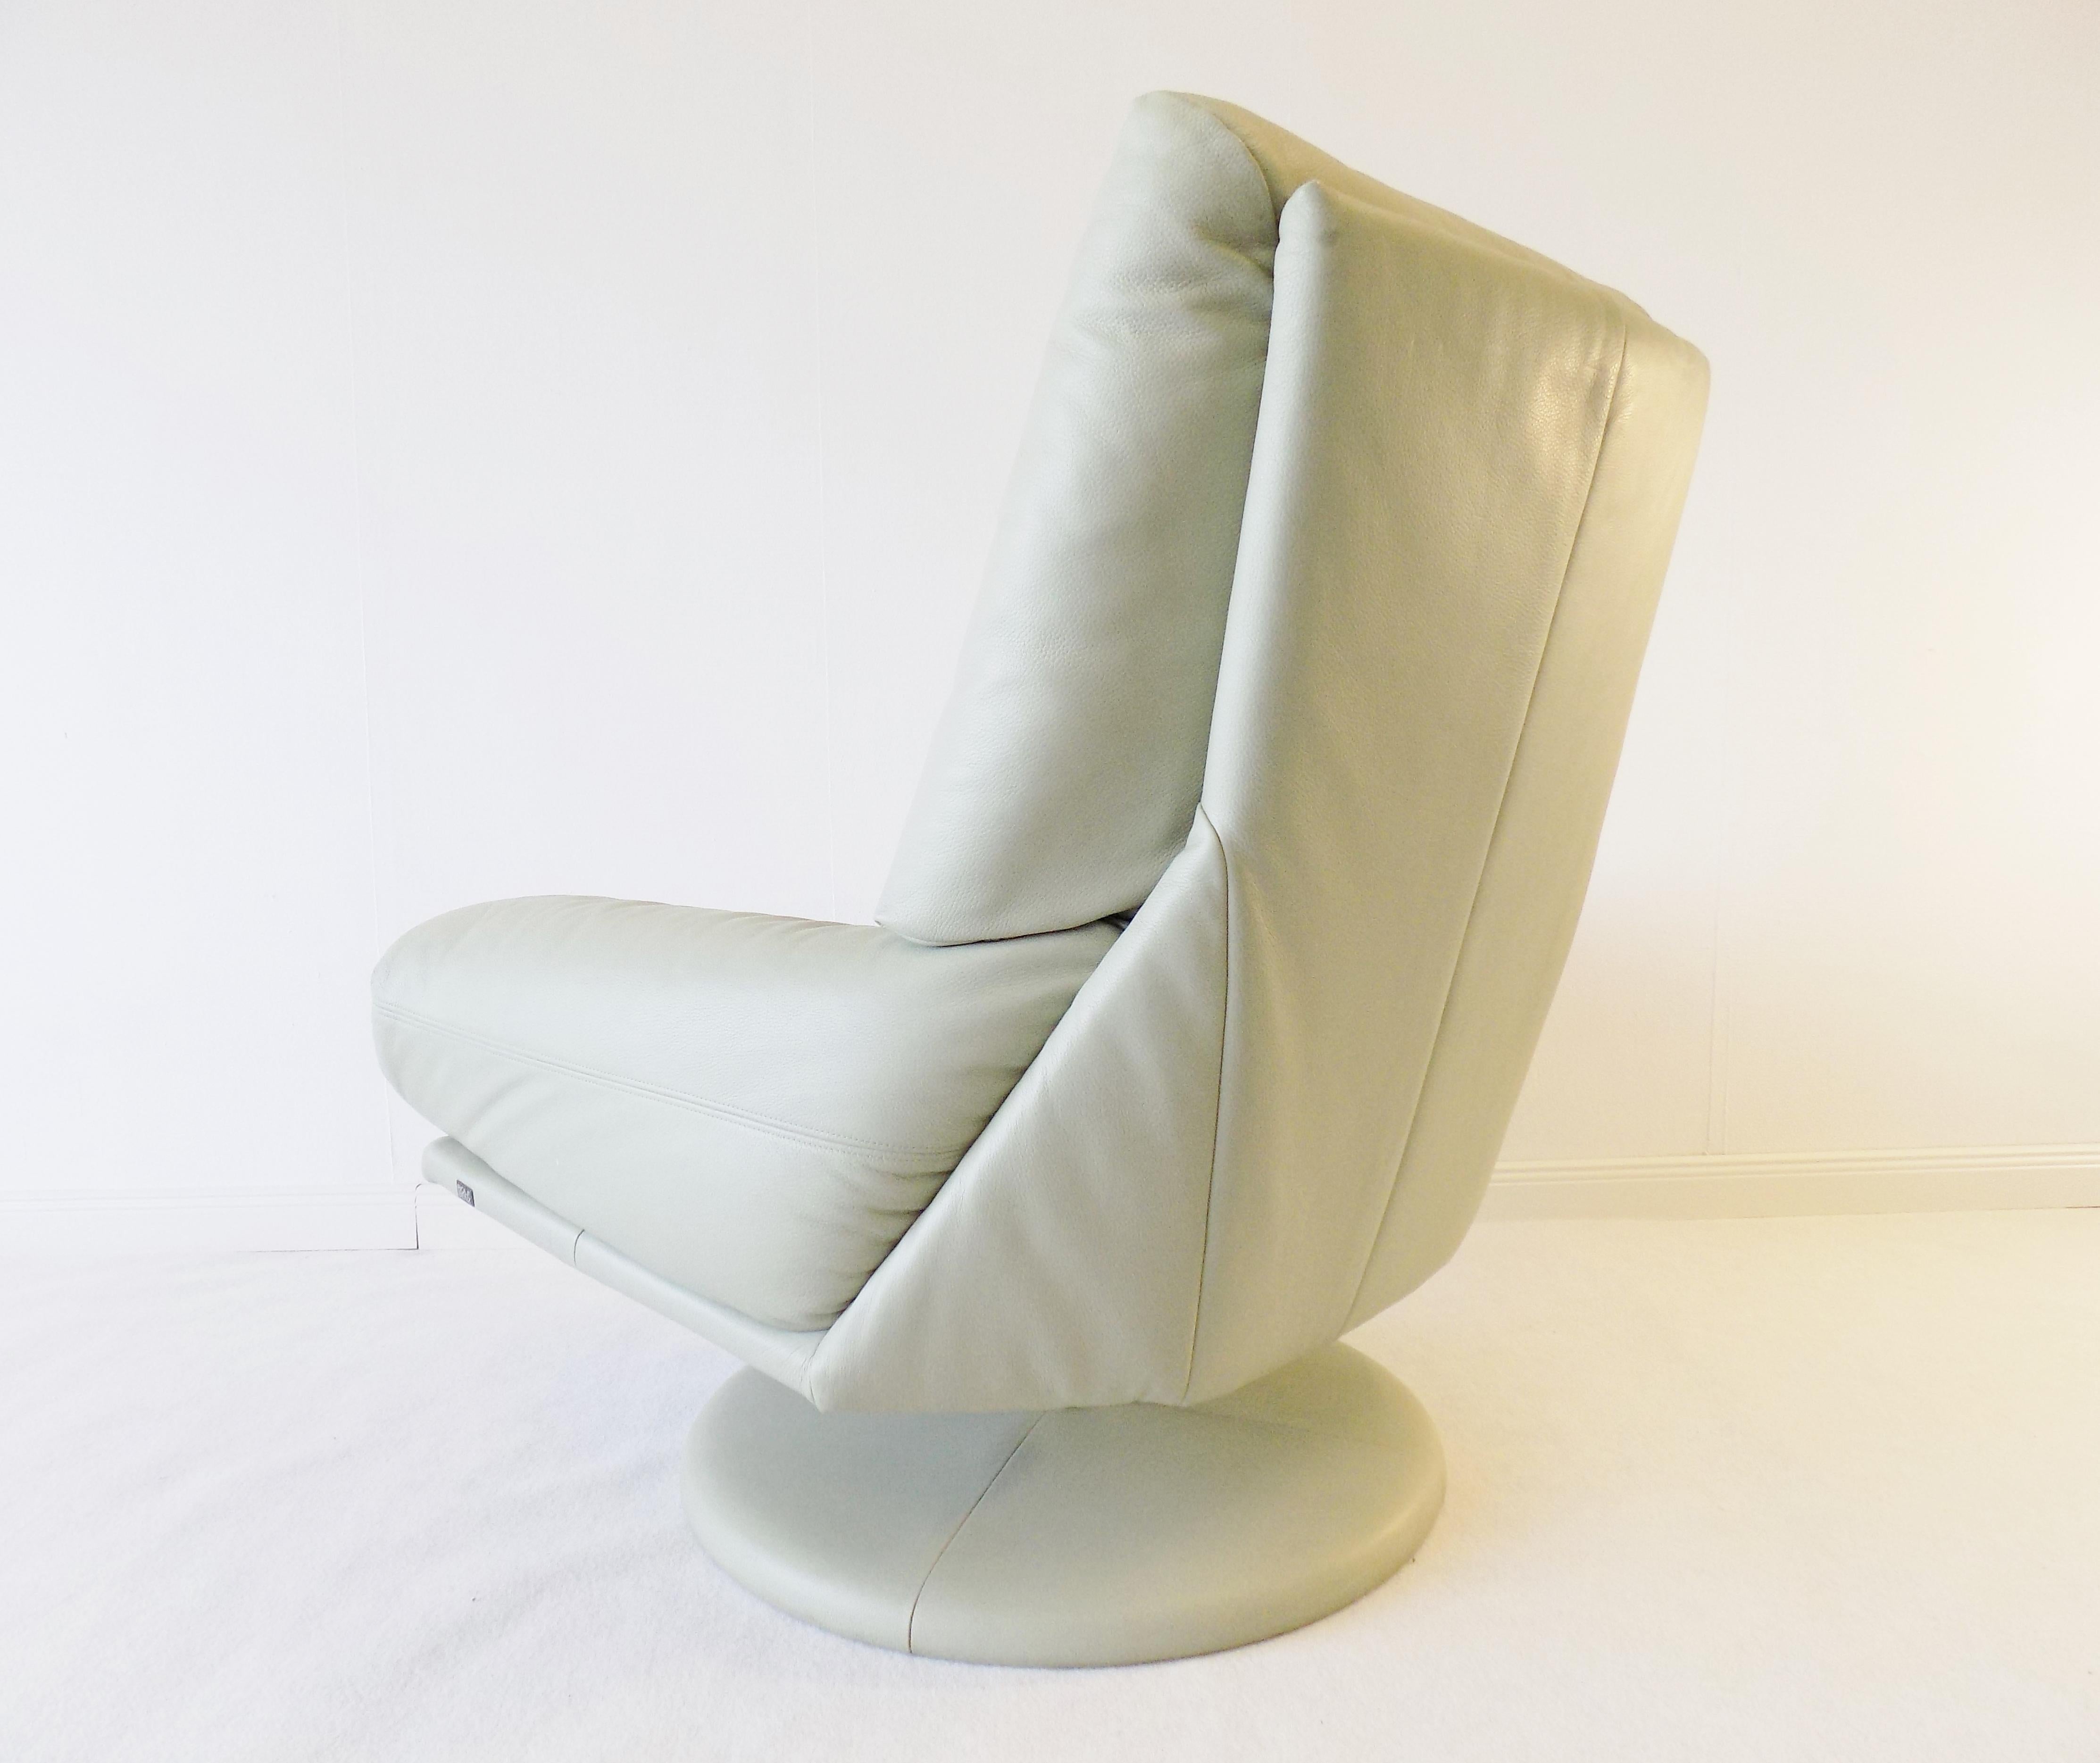 Rolf Benz Leather Loungechair Light-Mint, 1980s Germany, Swivel, Tiltable In Good Condition For Sale In Ludwigslust, Mecklenburg-Vorpommern